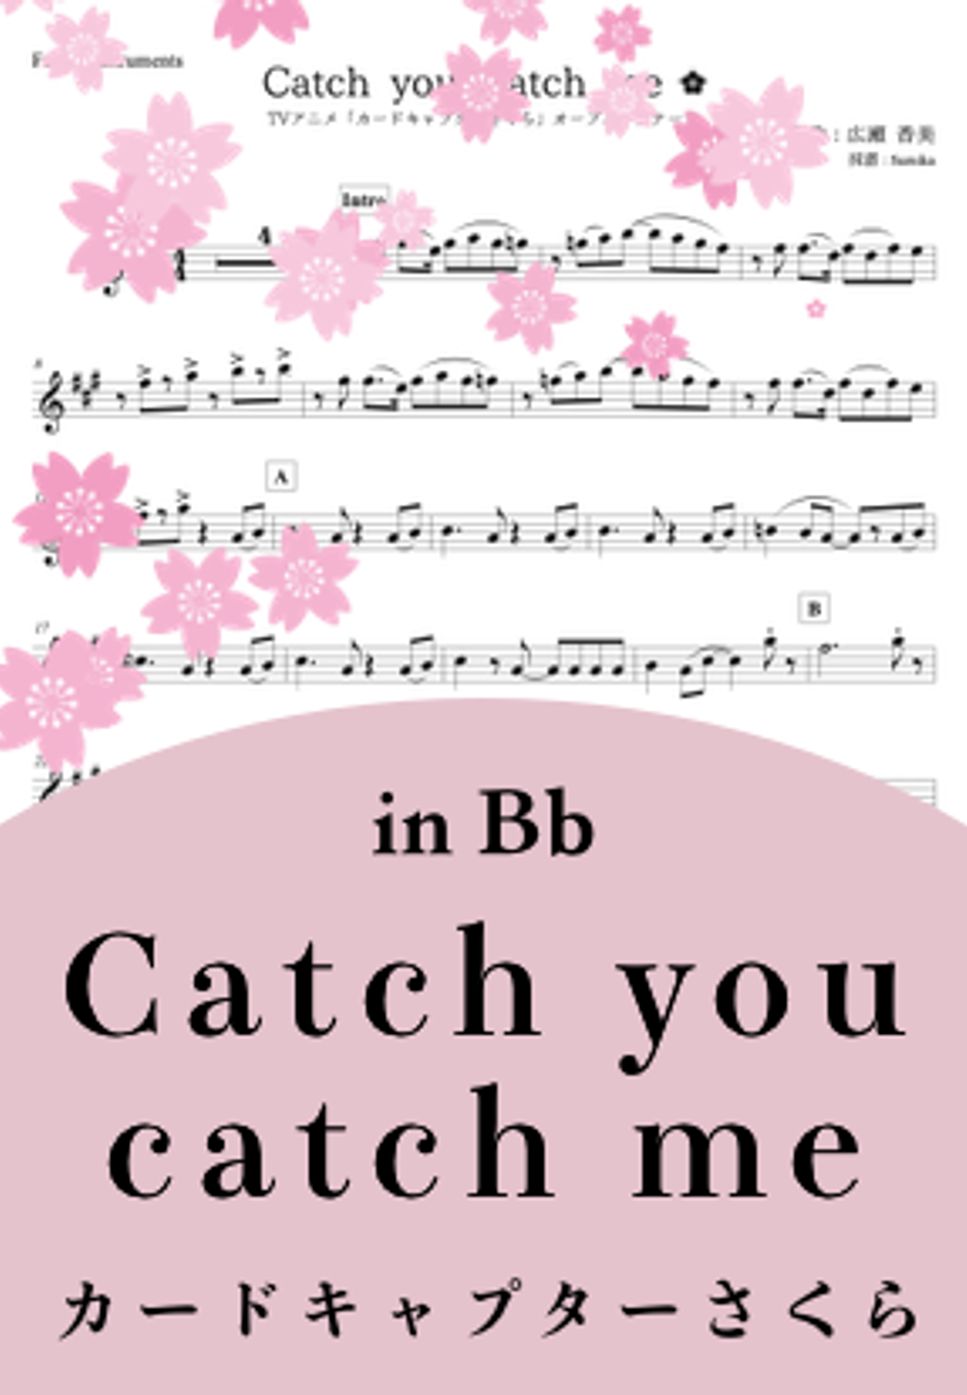 CCさくら - Catch you catch me (in Bb) by Sumika